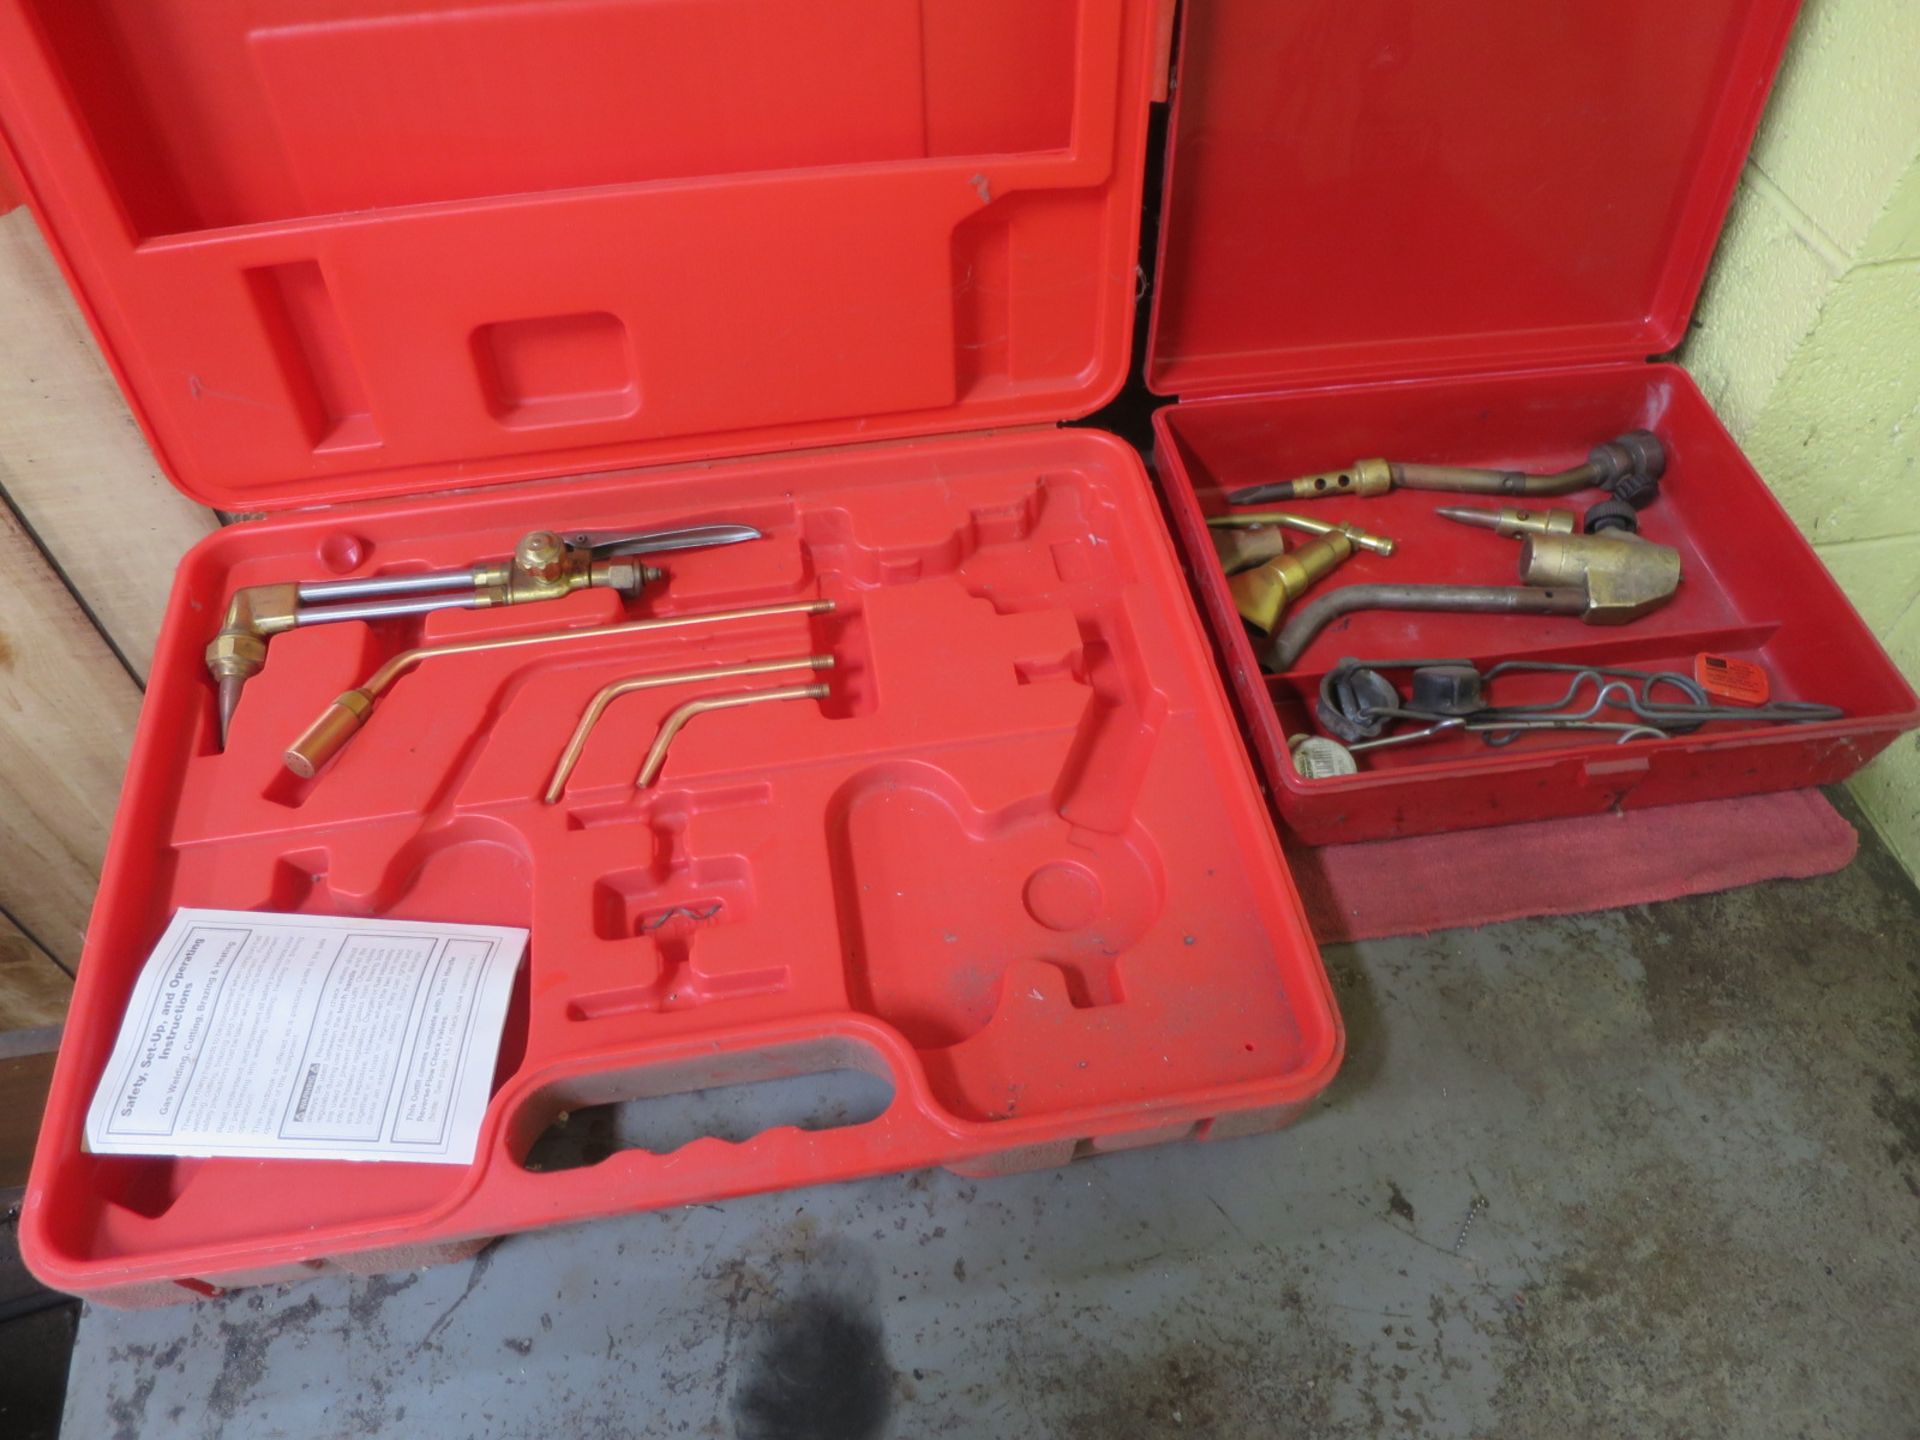 Acetylene Torch Set With Cart, Tanks, Table, And Extra Torches - Image 3 of 3